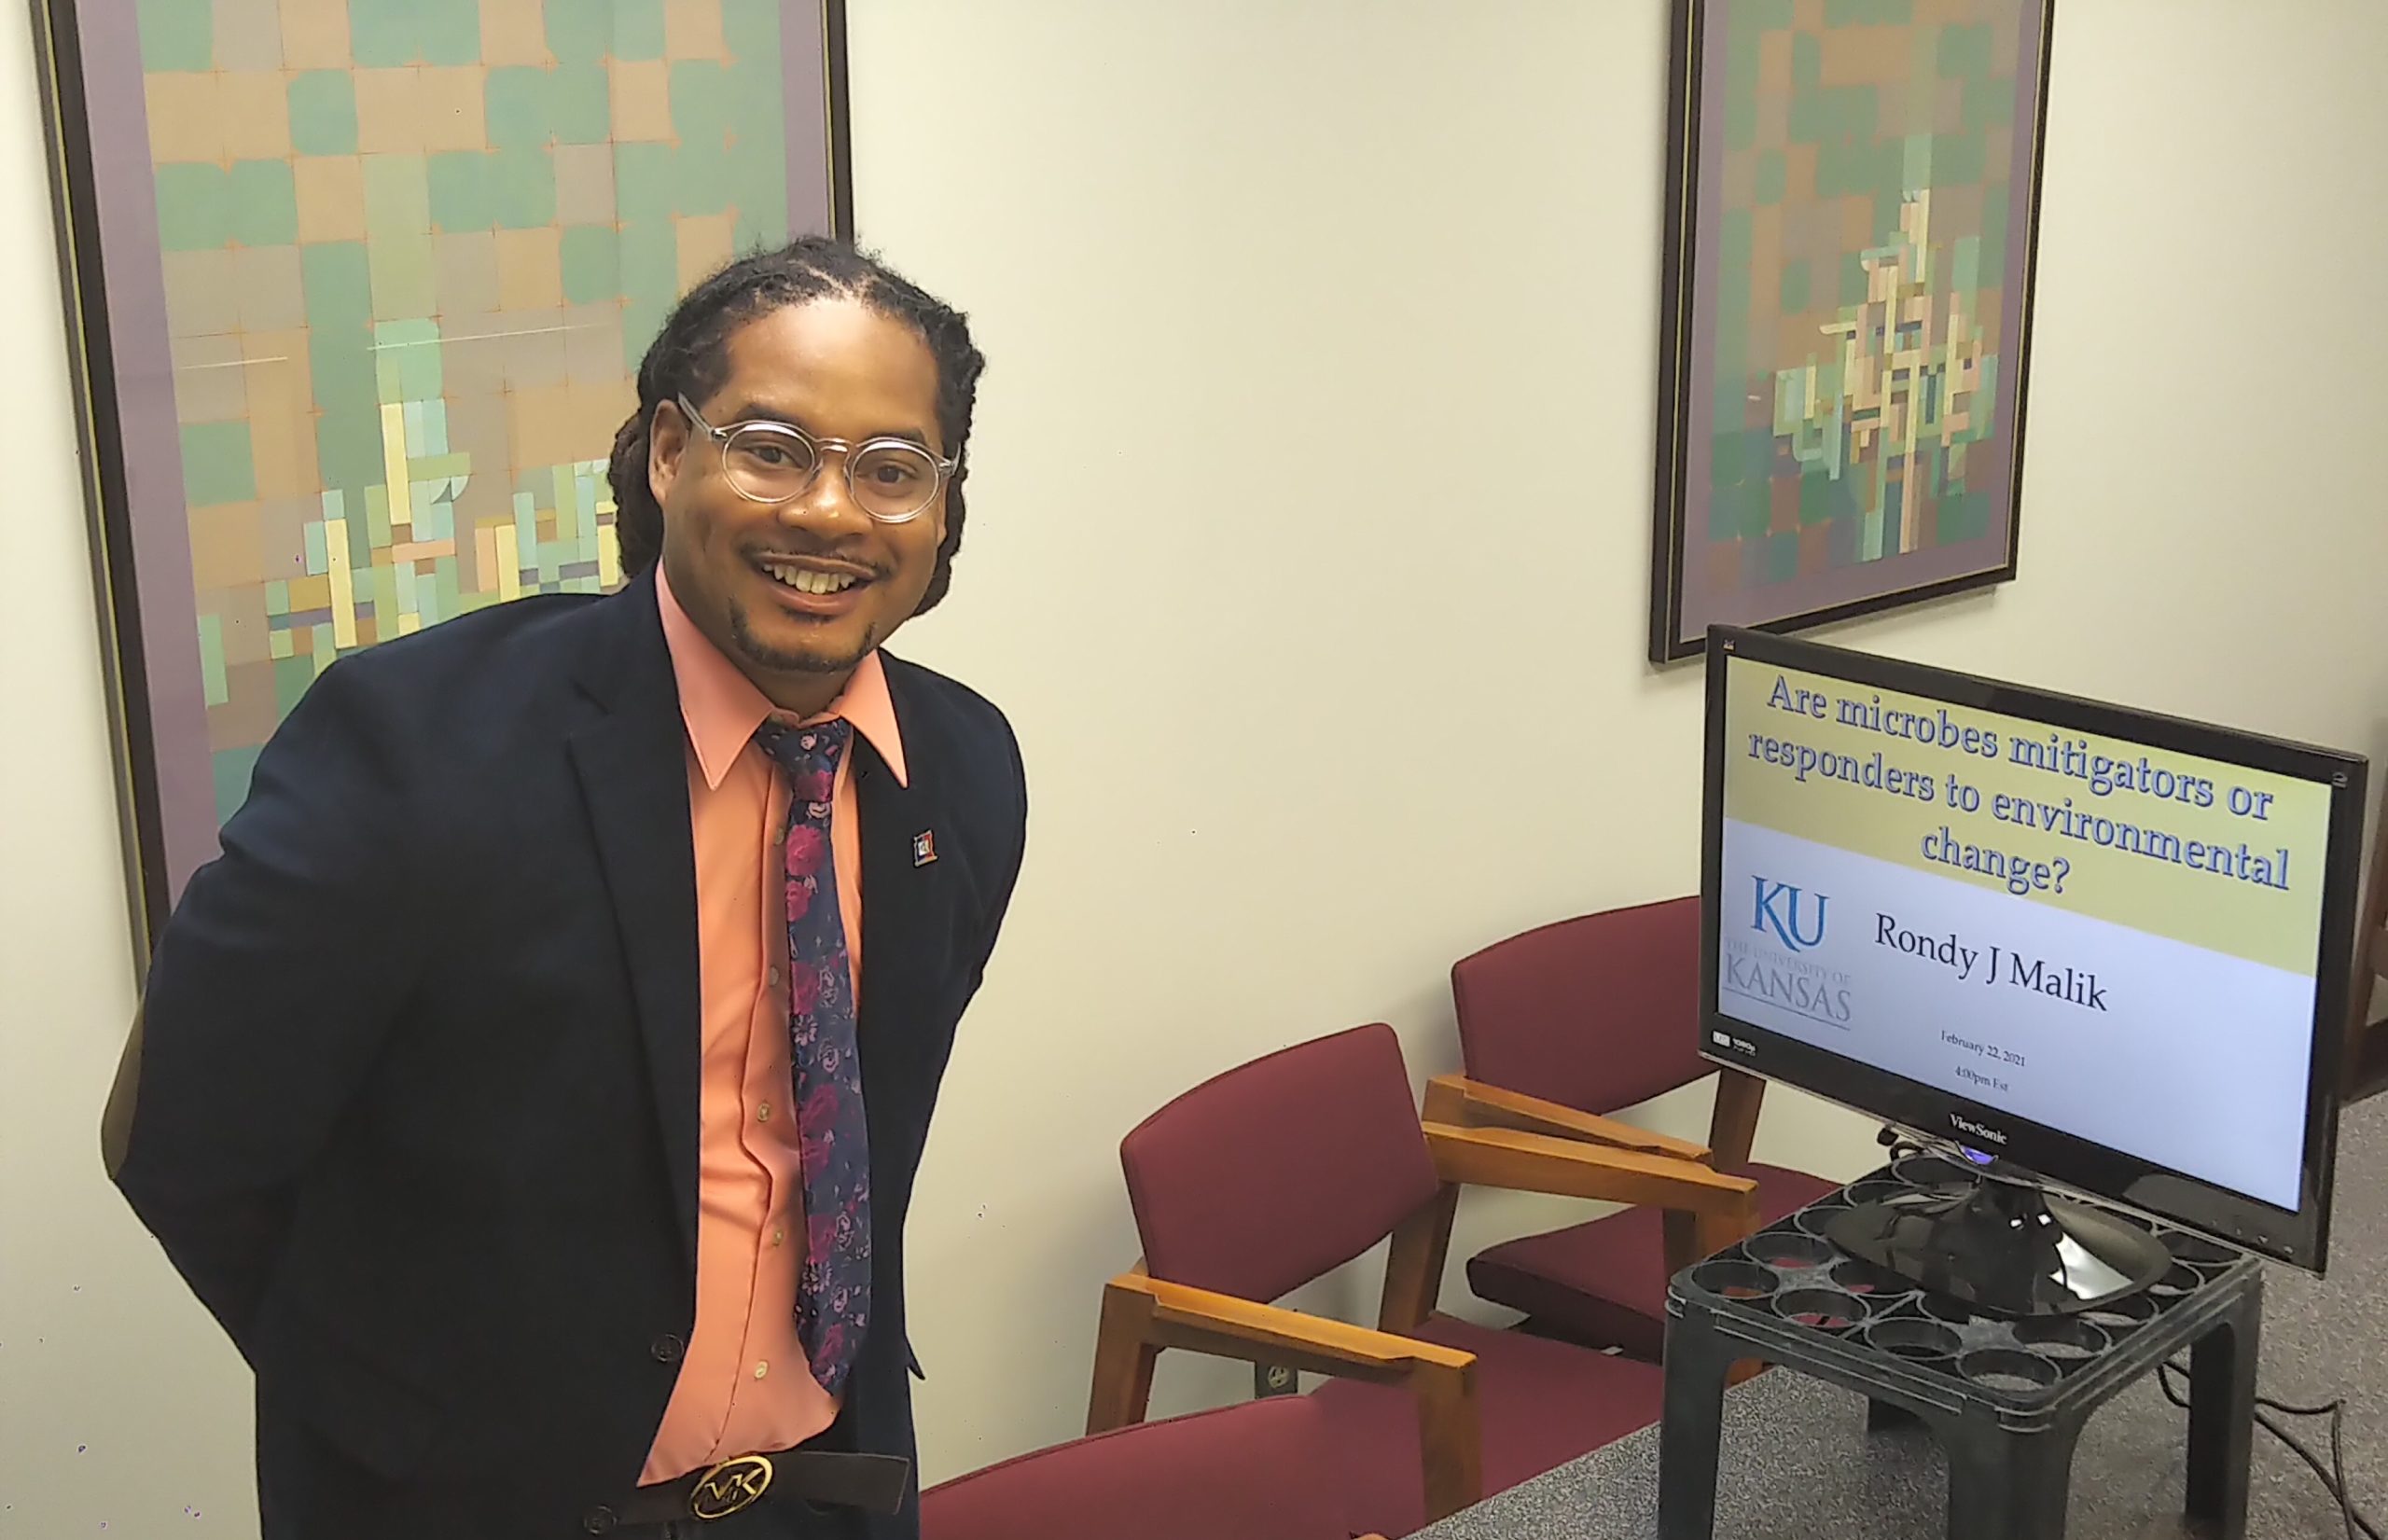 A brown skinned man wearing glasses, a black jacket, a light pink dress shirt, and a colorful tie poses smiling next to a device displaying a presentation slide